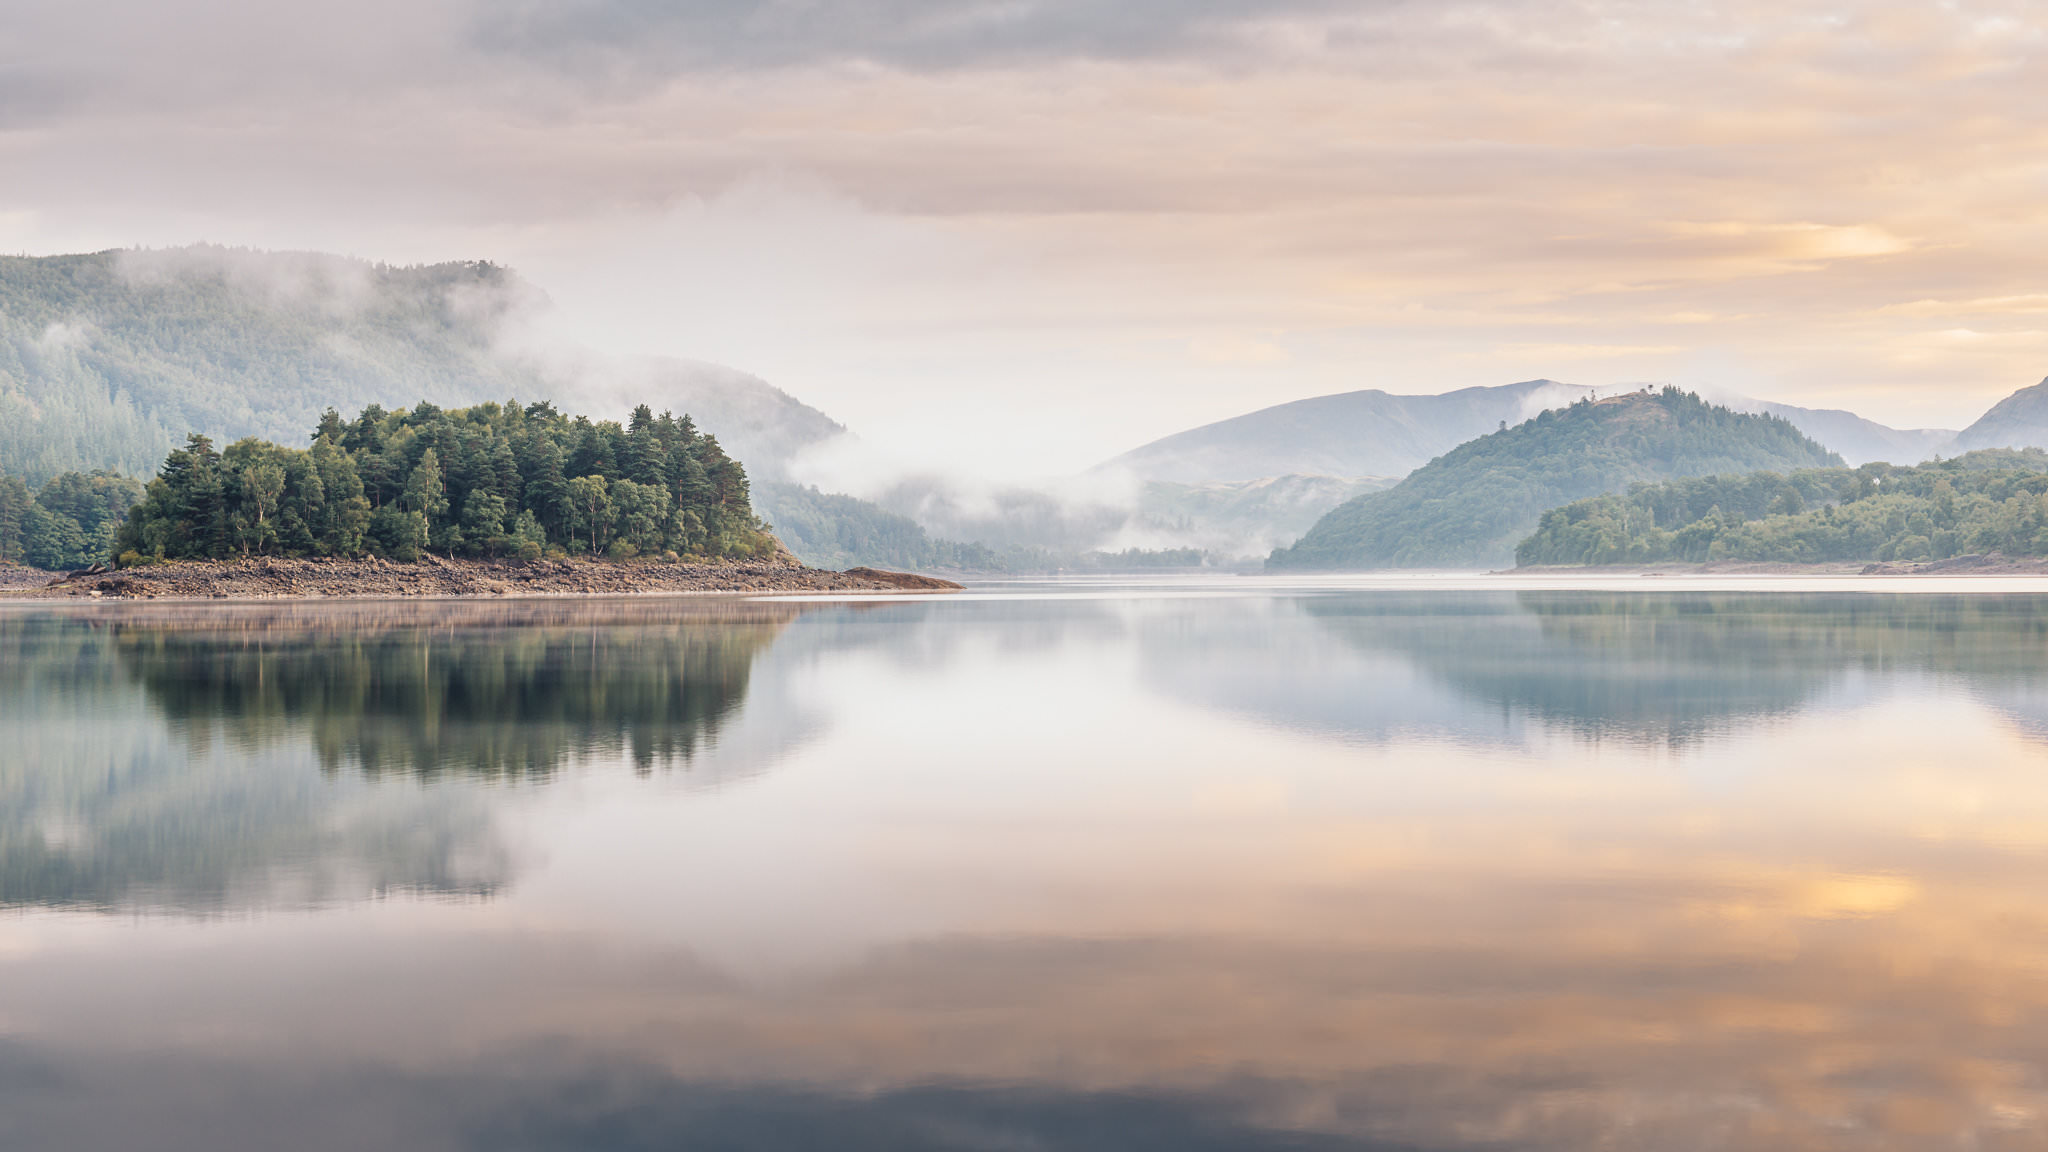 A Summer Morning - Thirlmere